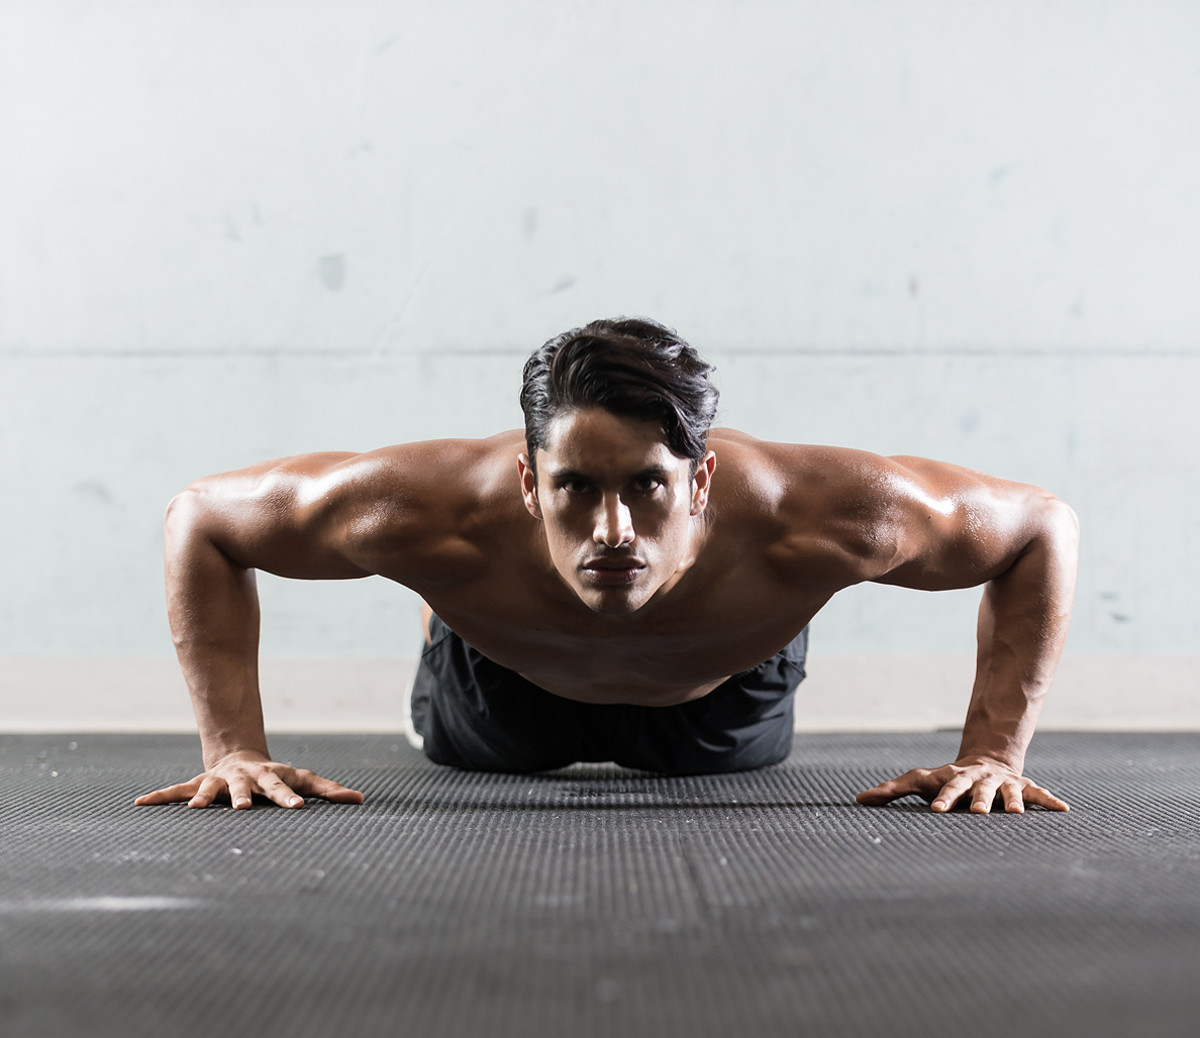 Most Americans Struggle to Do Just 5 Pushups, New Survey Finds